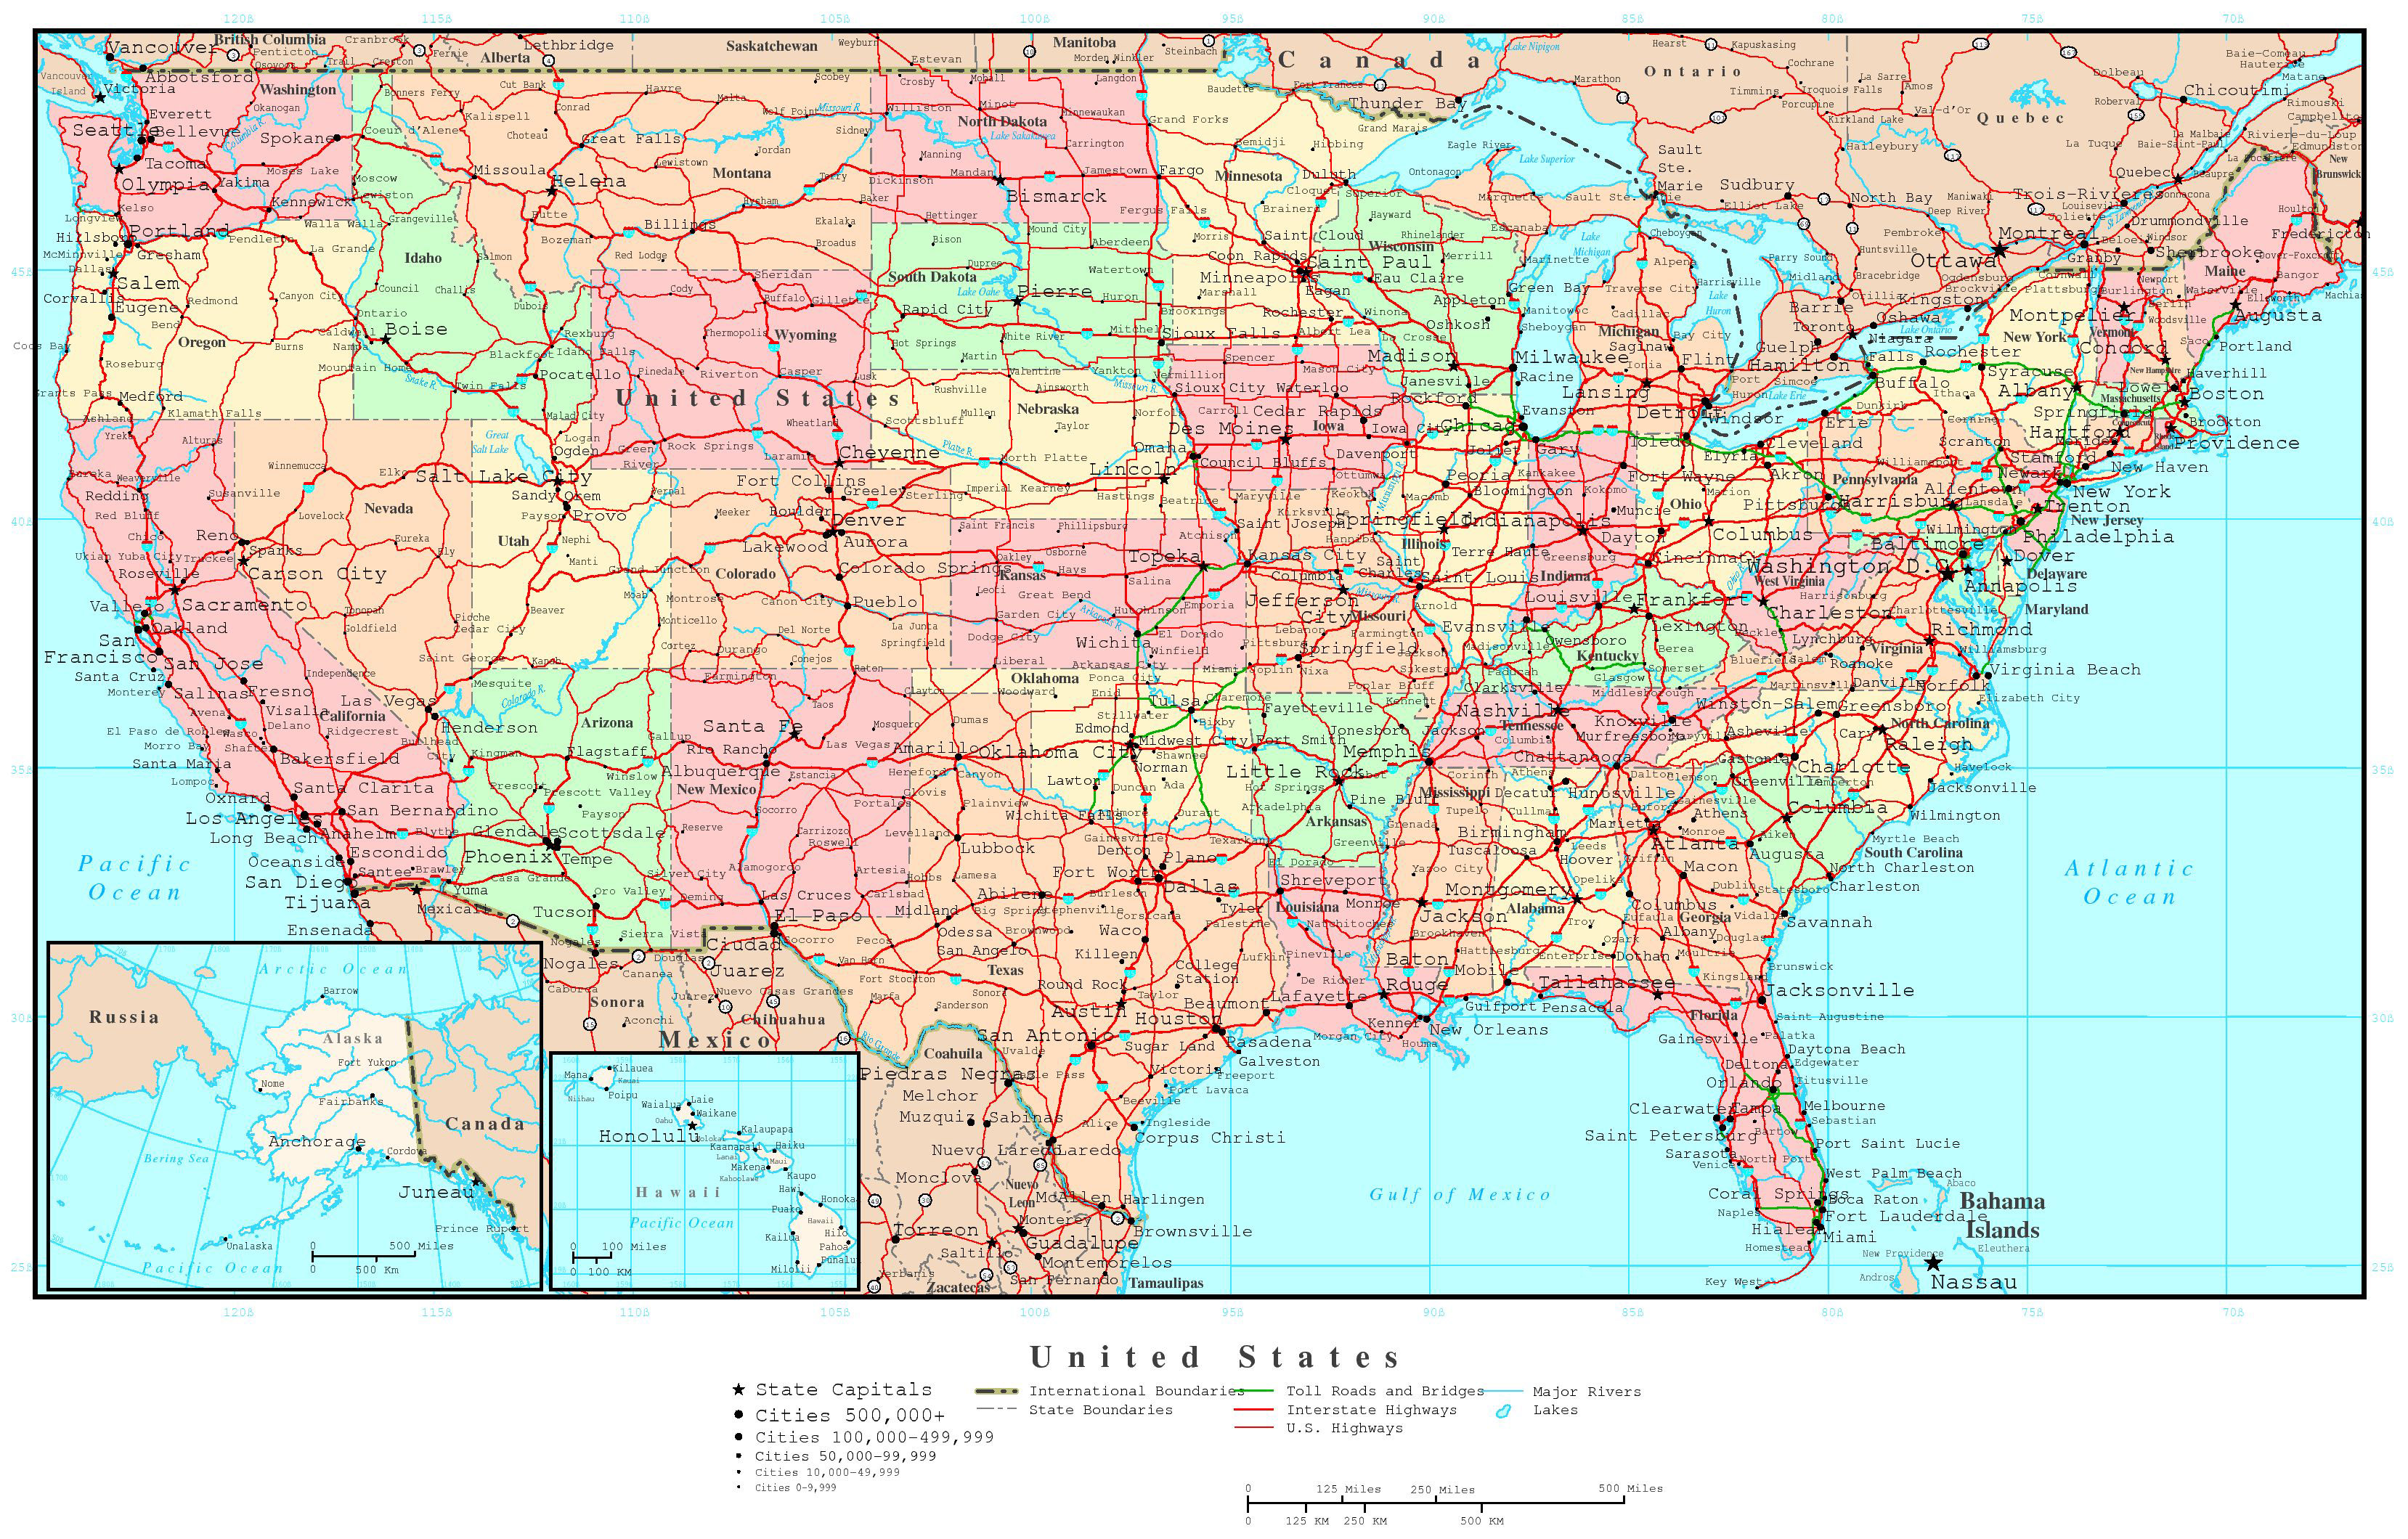 highway map of usa with states and cities Large Detailed Political And Road Map Of The Usa The Usa Large highway map of usa with states and cities